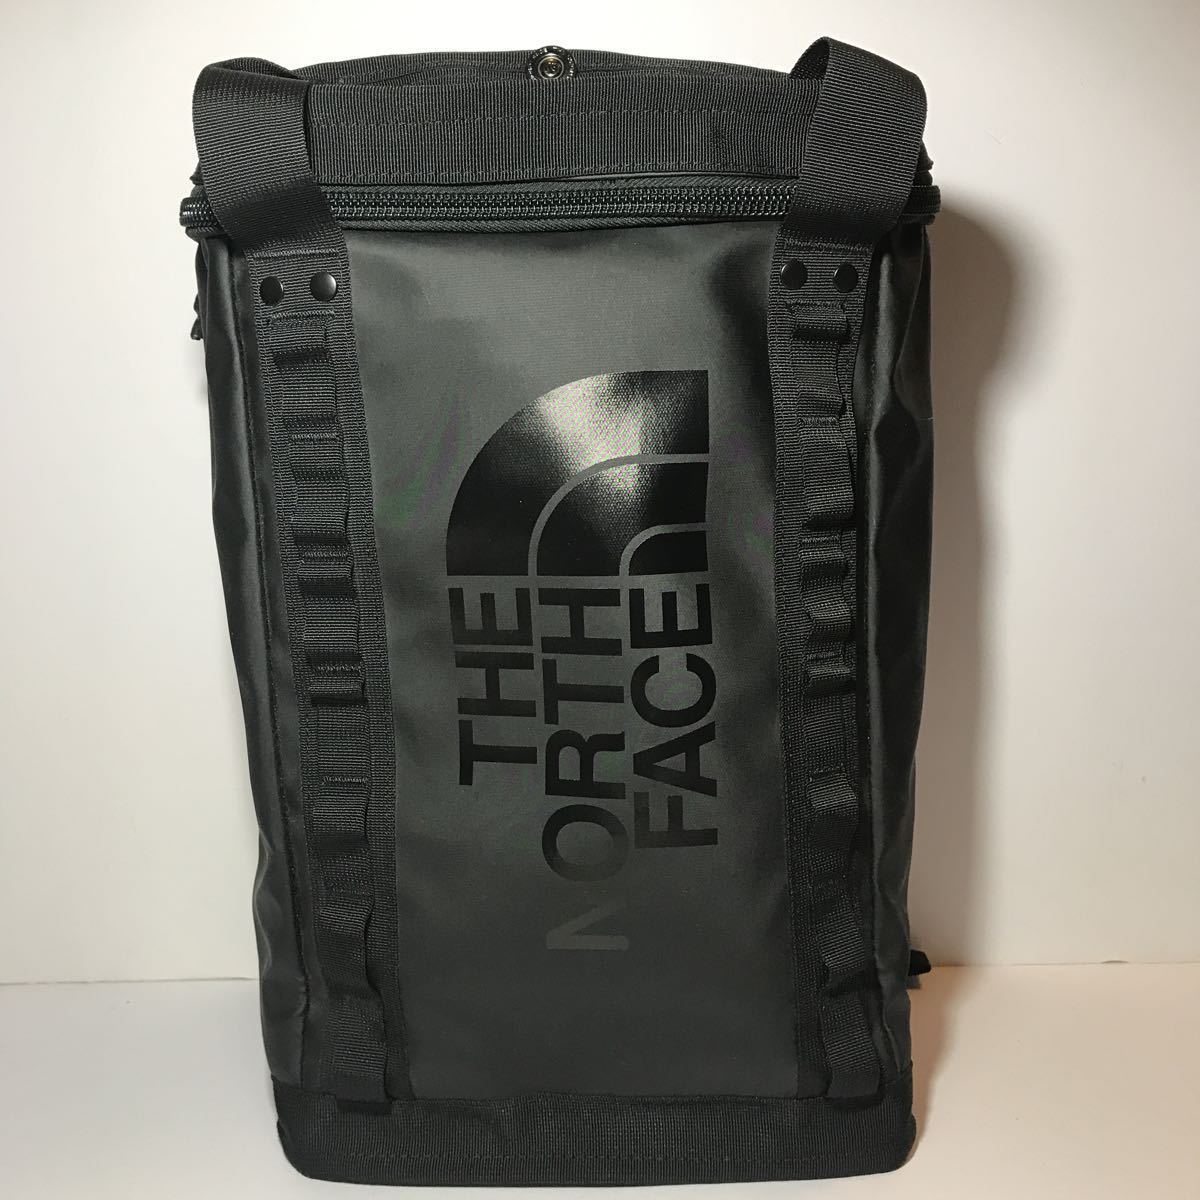 THE NORTH FACE EXPLORE FUSEBOX DAYPACK-S 米国限定 ザ ノースフェイス バックパック NF0A3KYV ヒューズボックス ブラック リュックサック